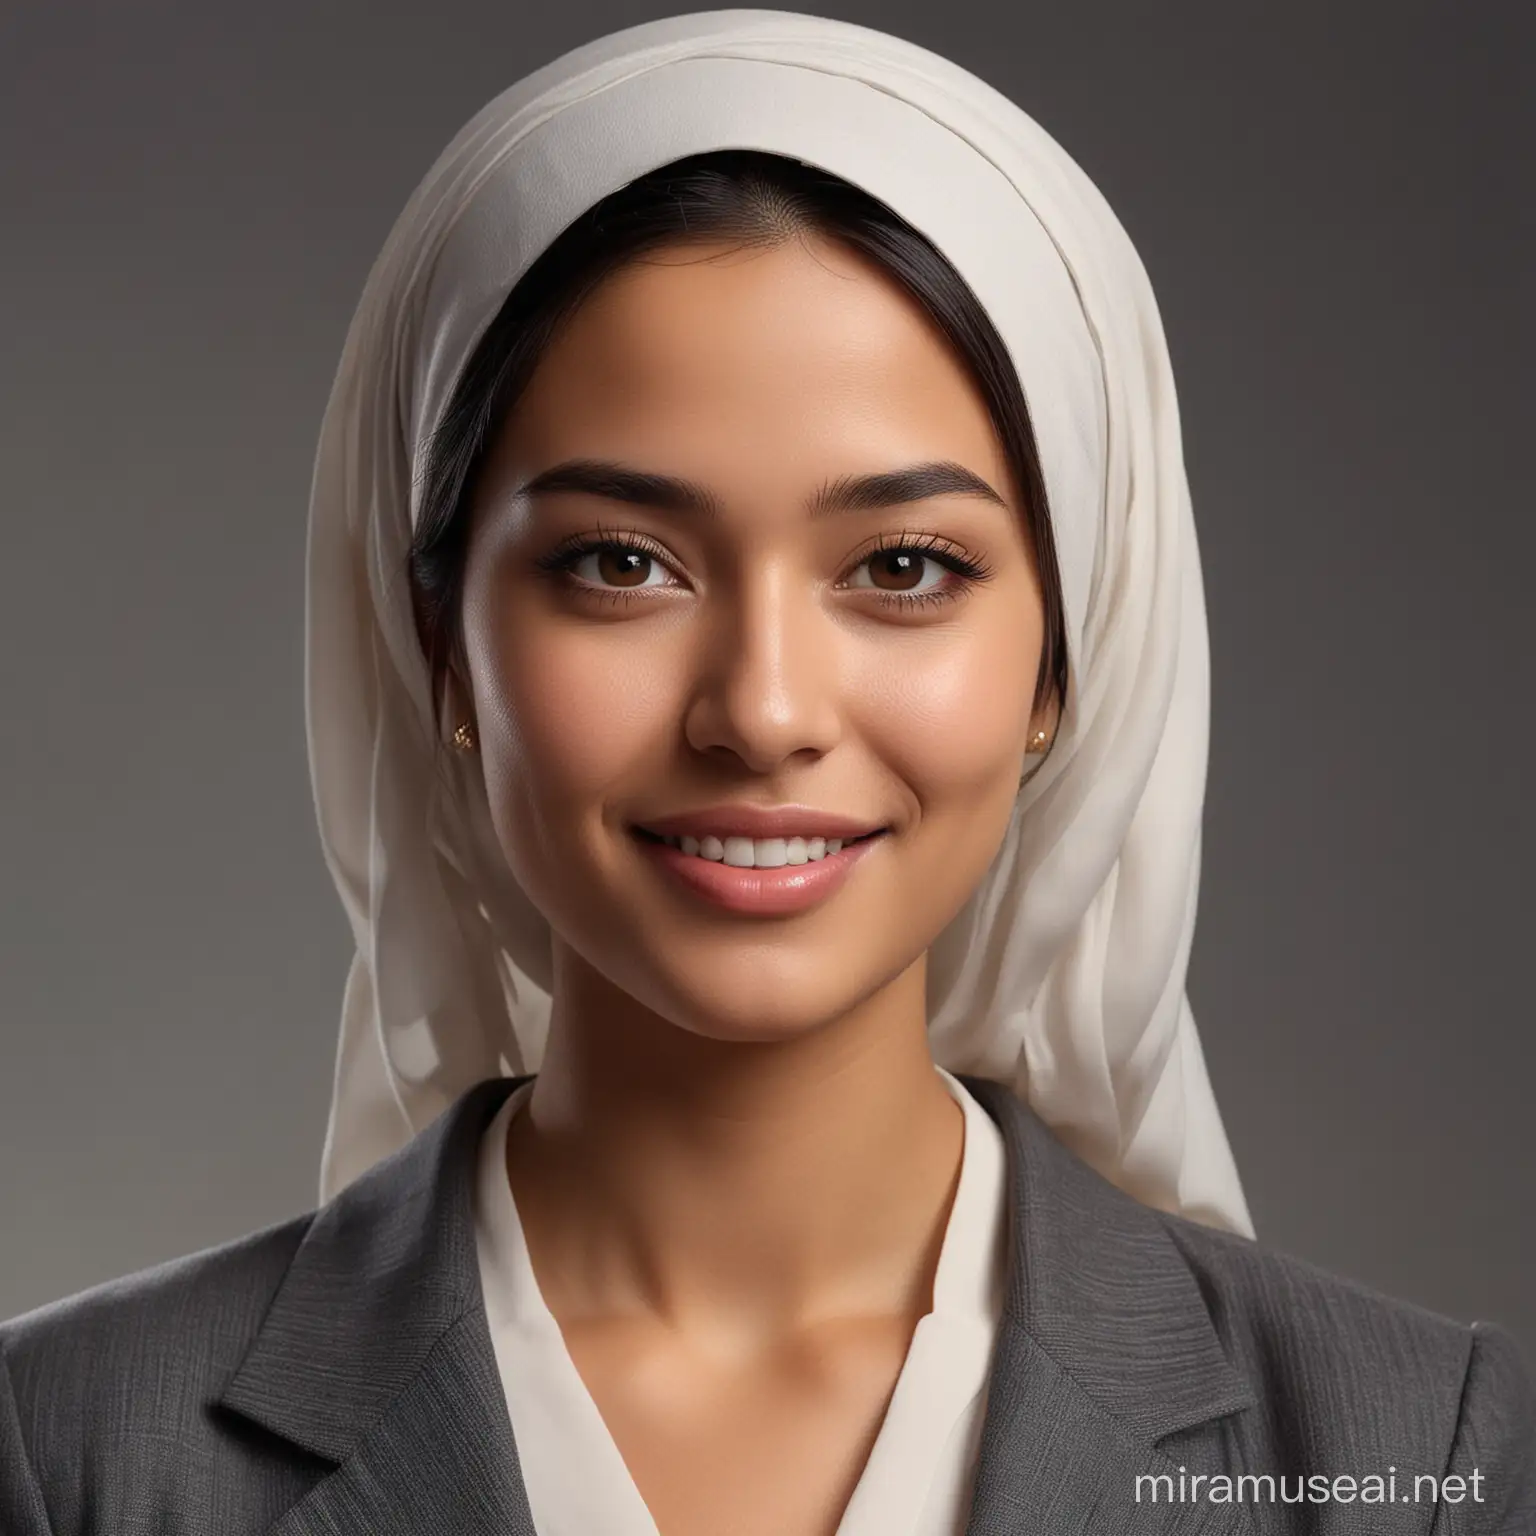 Serene Malay Woman in Hijab Smiling Confidently in Gray Blazer